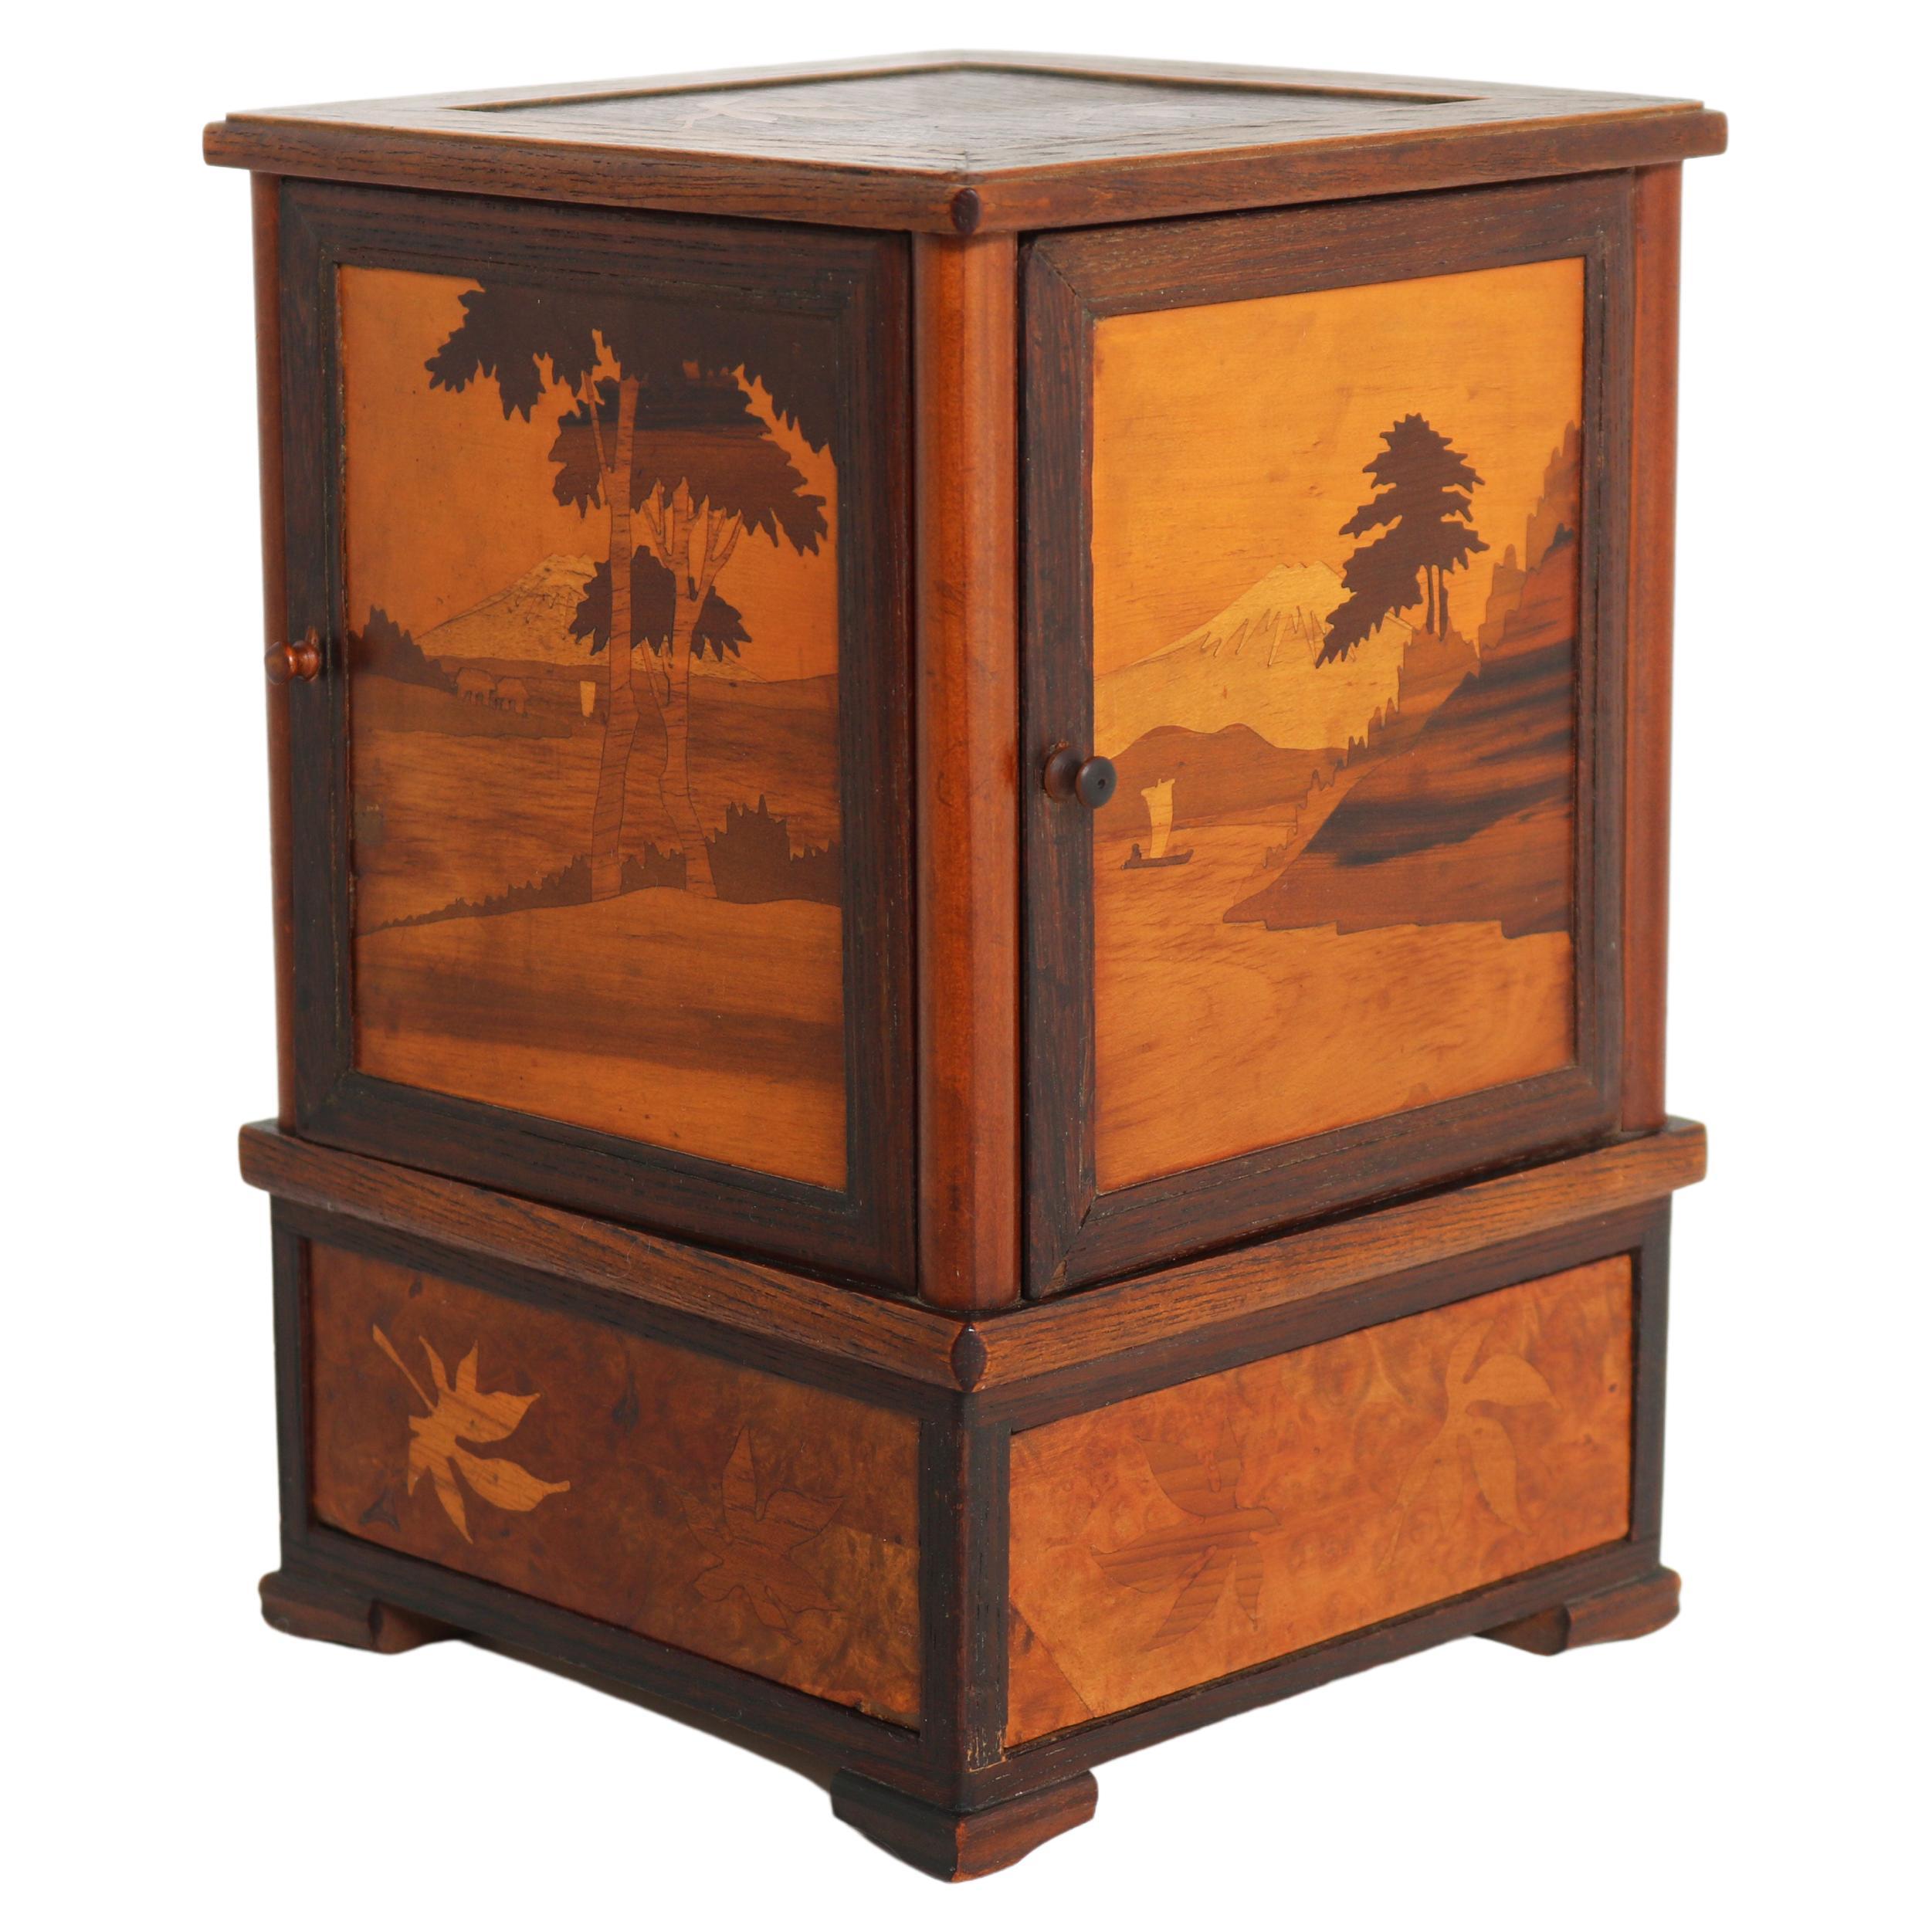 Antique French Inlaid Marquetry Cigar Box 1900 Cigarette Cabinet Desk Decoration For Sale